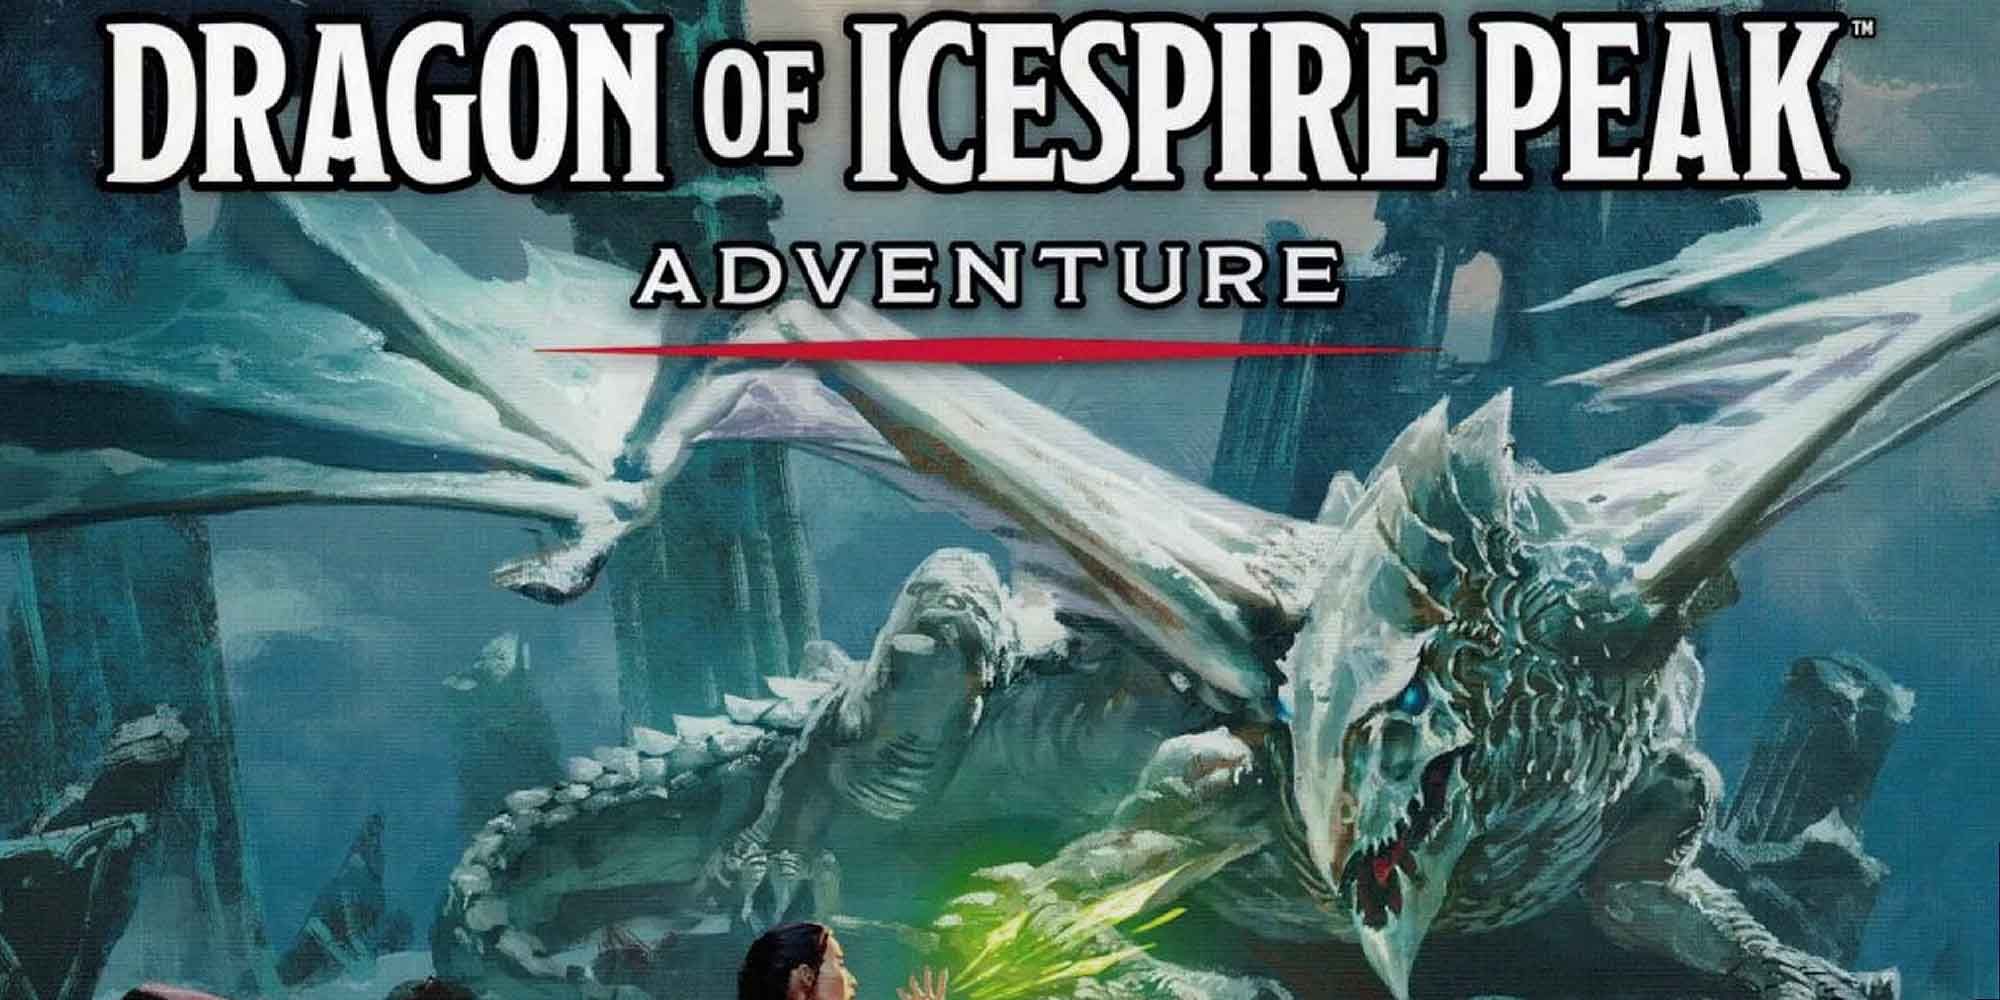 The cover of Dragon of Icespire Peak D&D campaign book